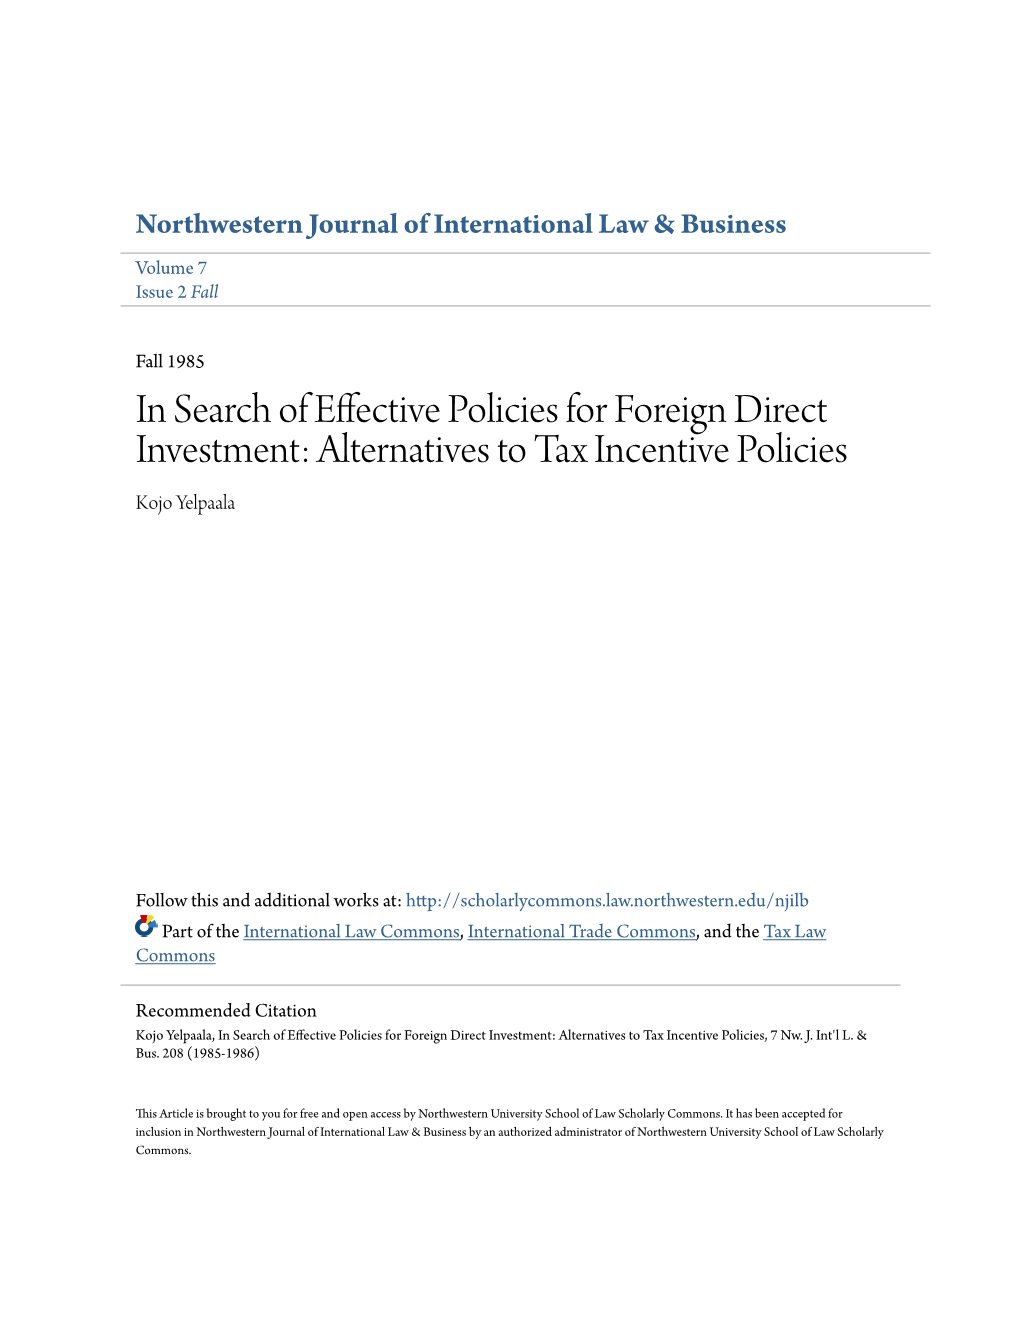 In Search of Effective Policies for Foreign Direct Investment: Alternatives to Tax Incentive Policies Kojo Yelpaala